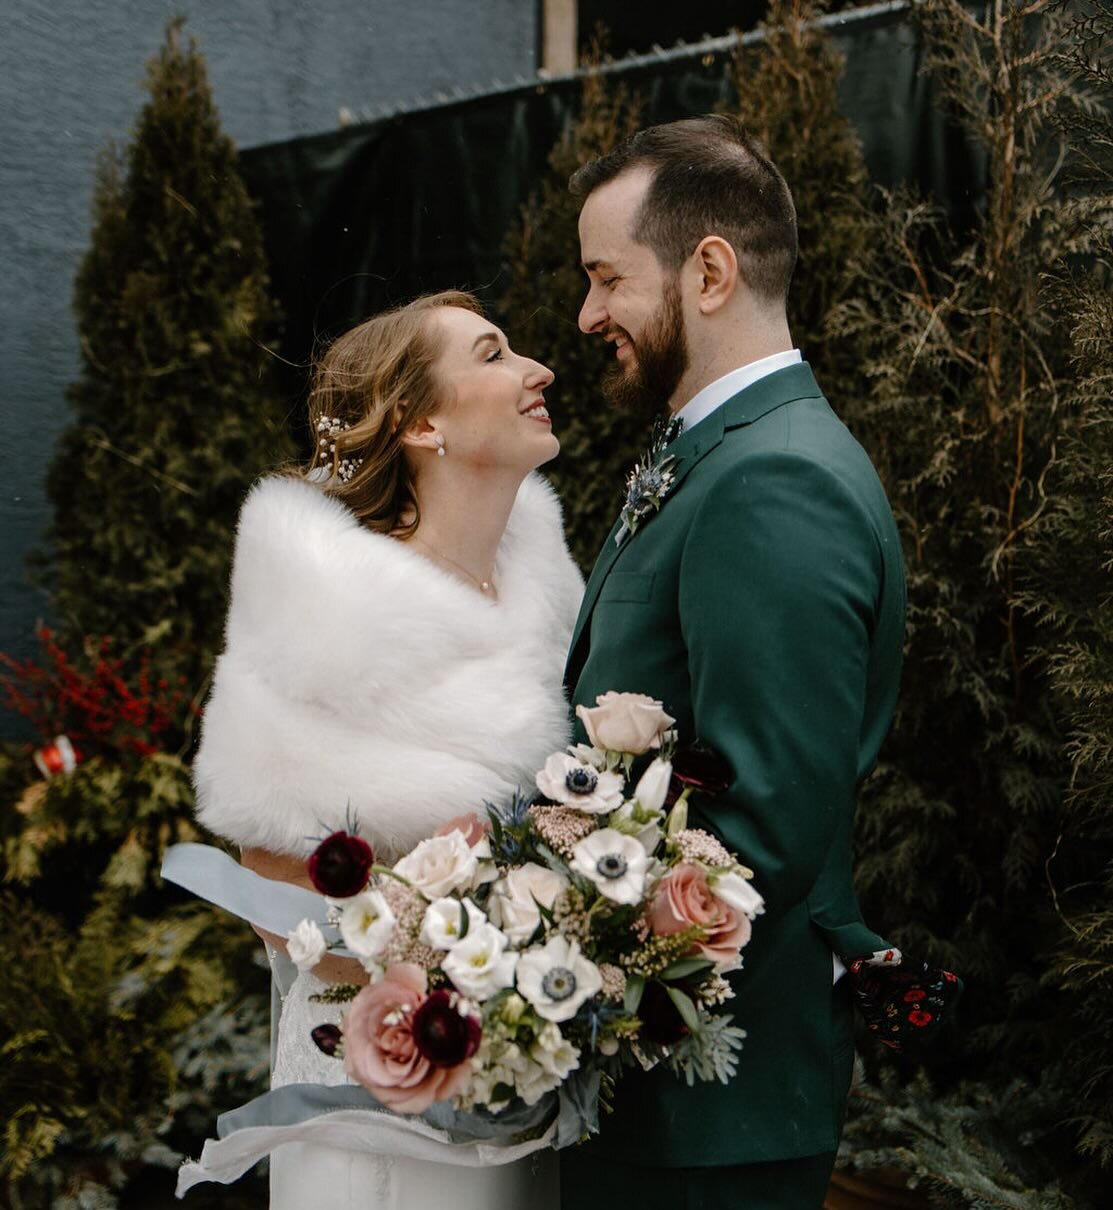 Still daydreaming about Kim &amp; Phil&rsquo;s January wedding❄️🤍
-
The temps might have been low, but the energy and love were at a record high🌡️&hearts;️
-
📸 @rachelruth.co